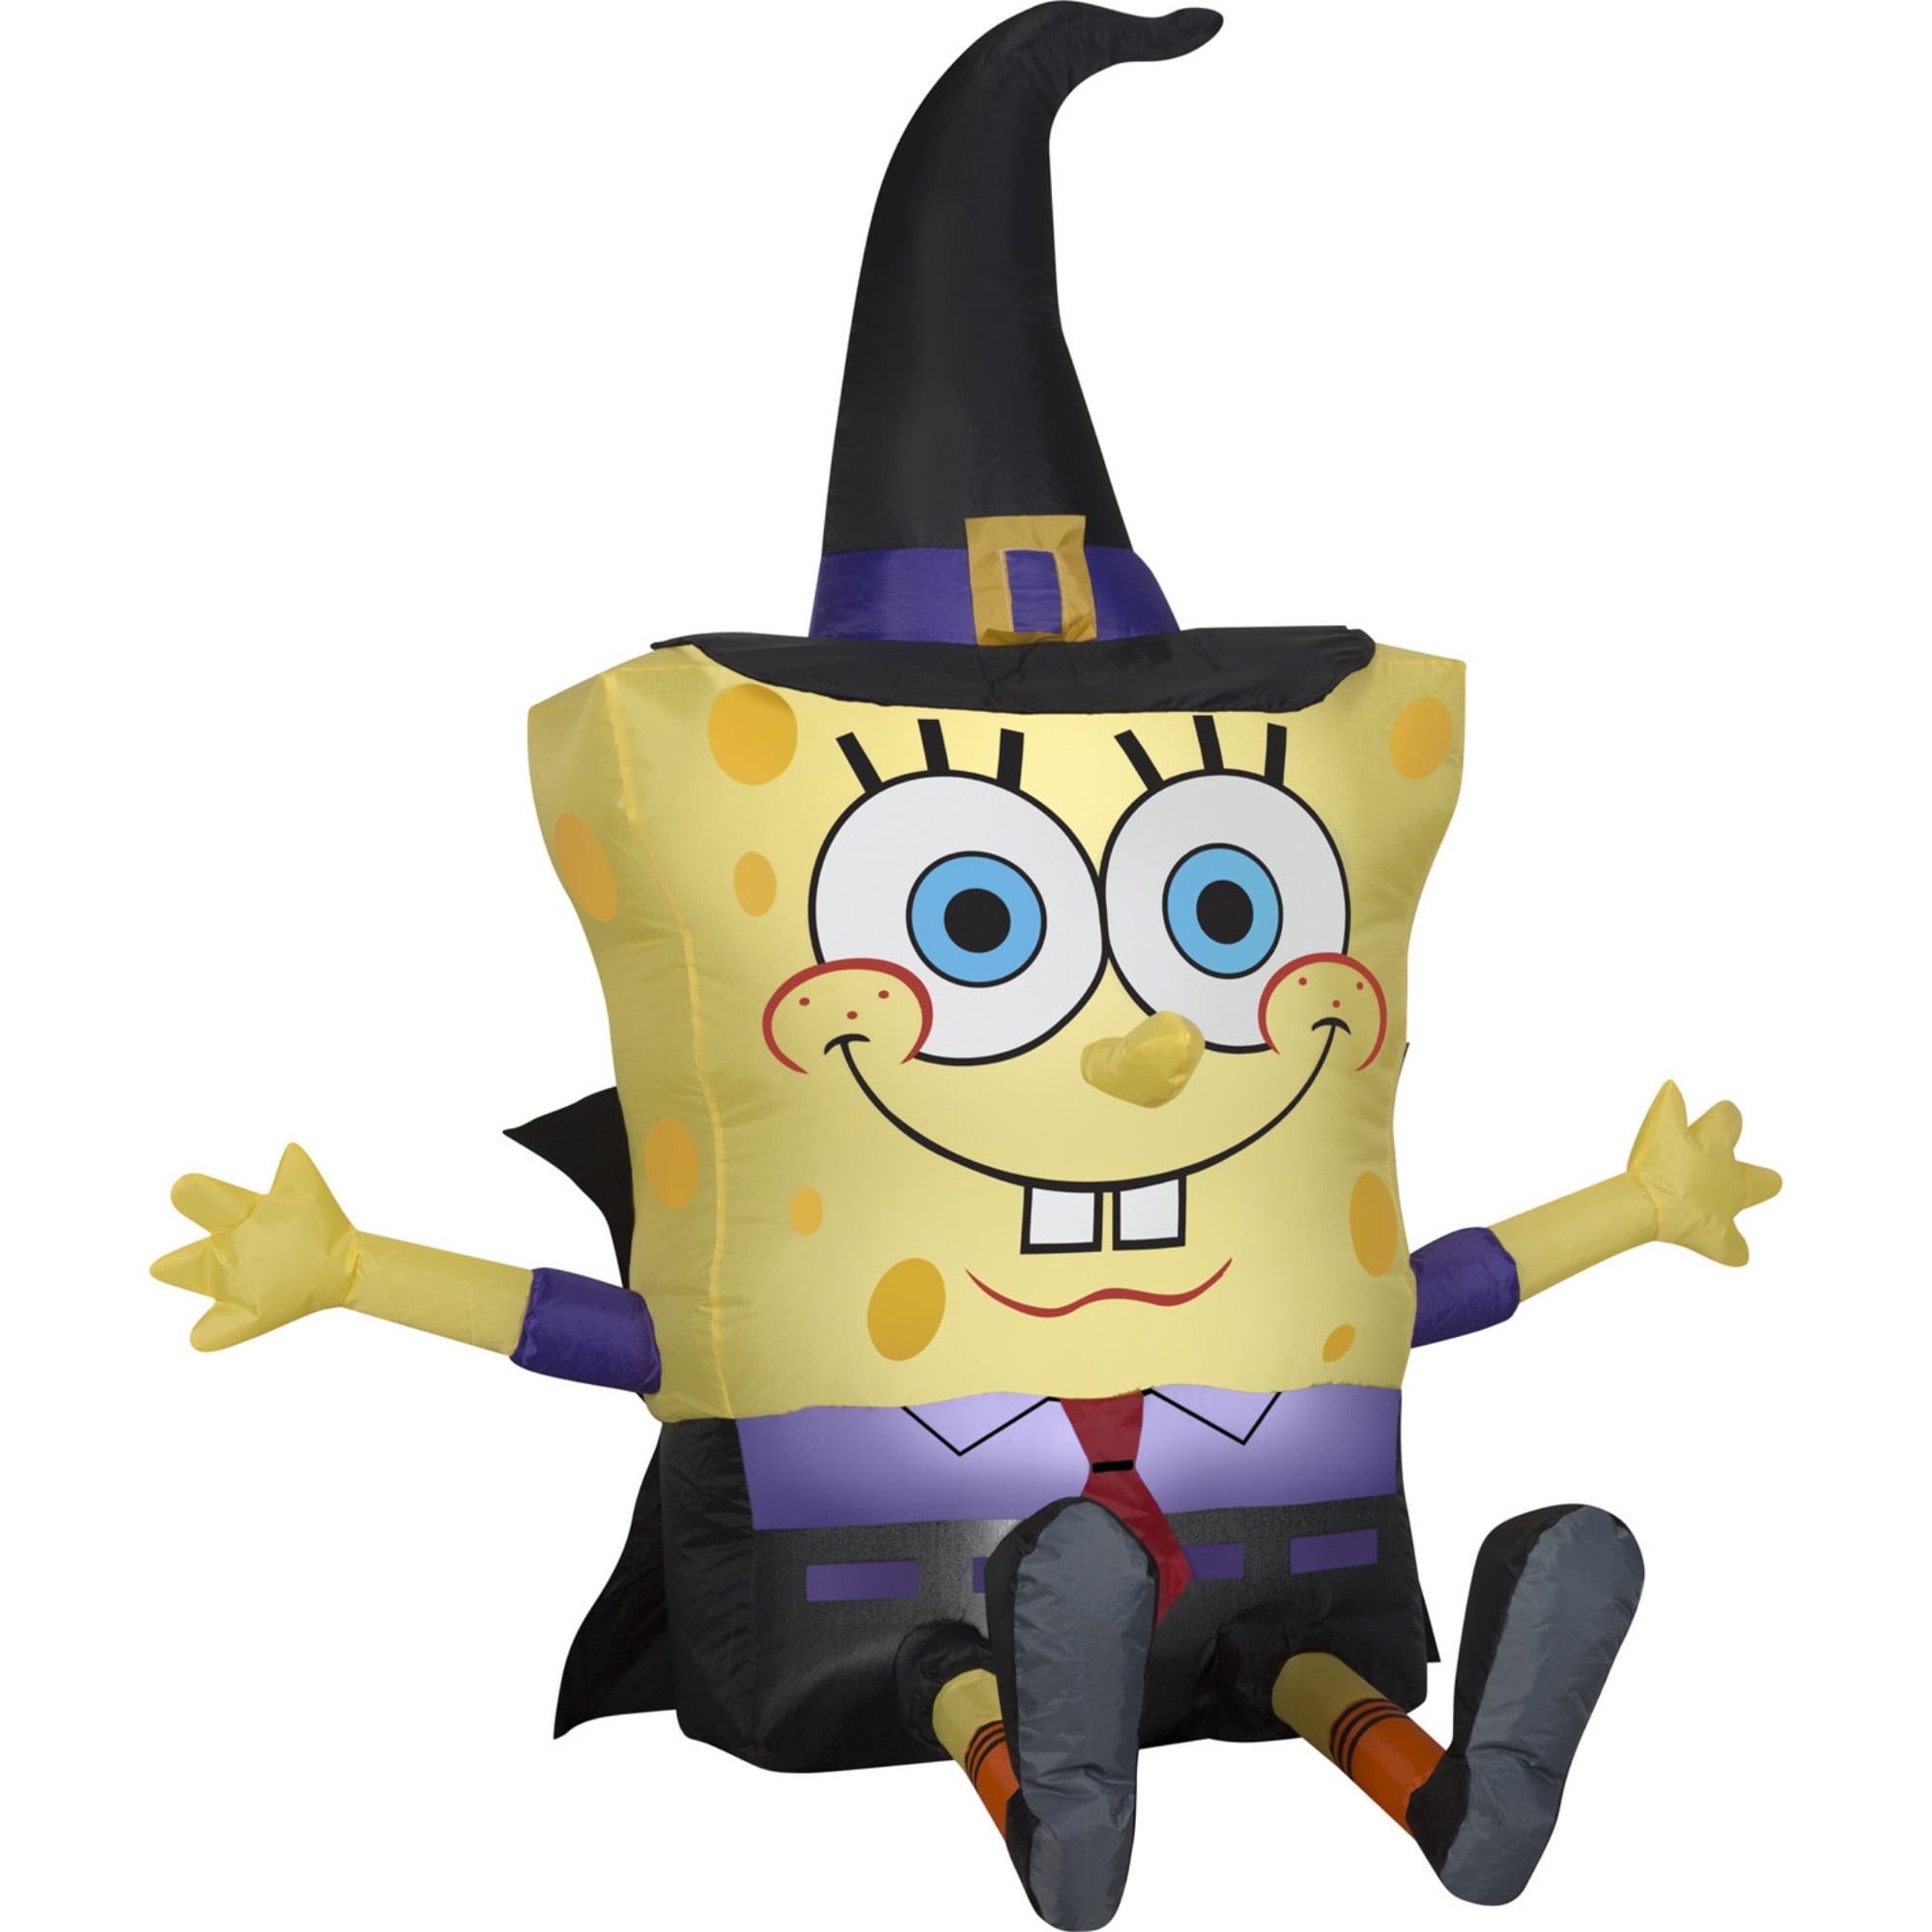 Picture of Airblown Inflatables G08 225499X Nicholedon SpongeBob SquarePants in Witch Costume